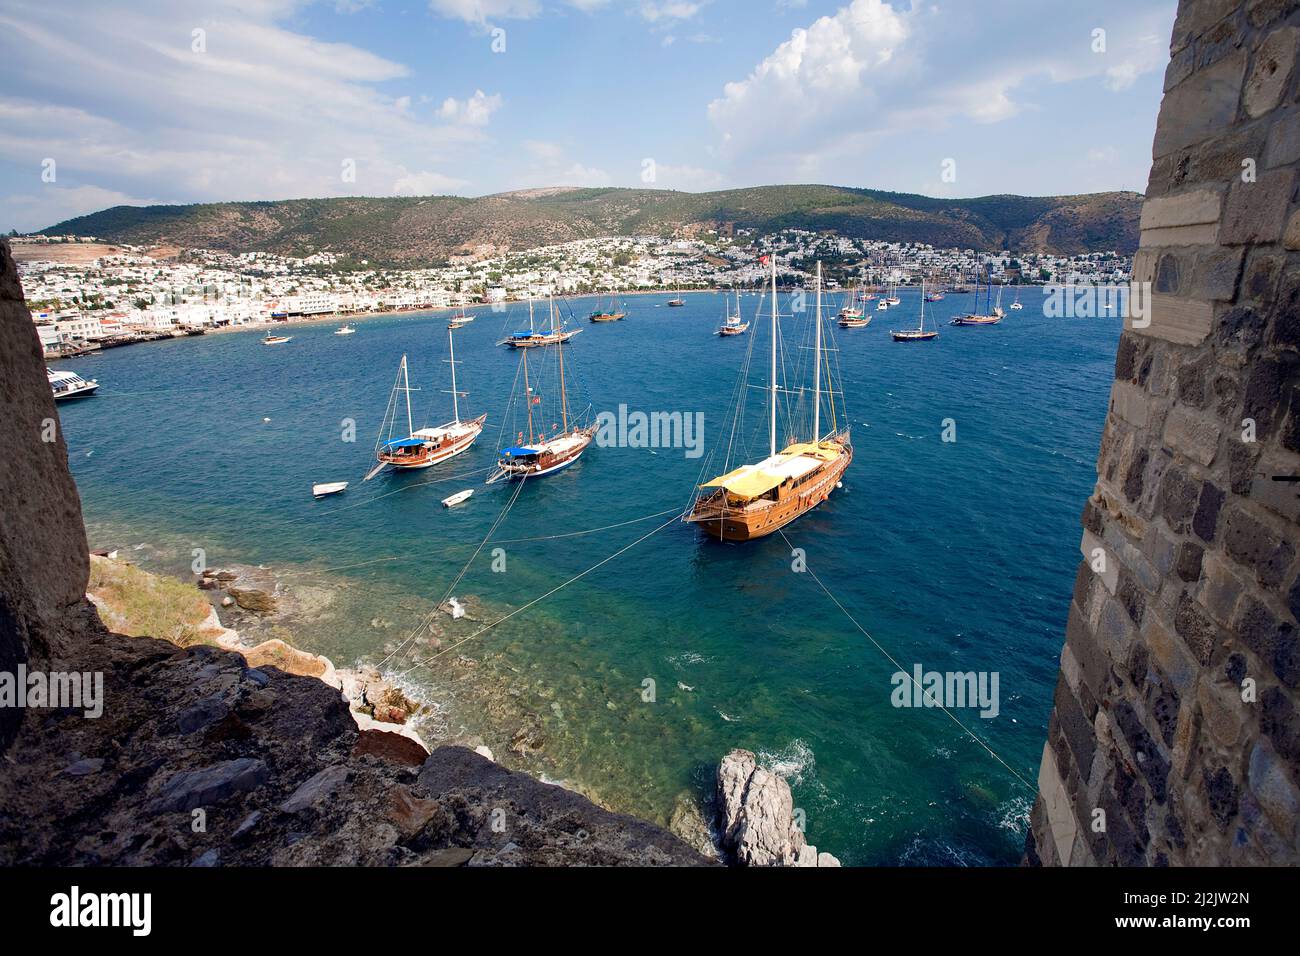 View from Bodrum castle or Castle of St. Peter, UNESCO world heritage site and landmark of Bodrum, Turkey, Mediterranean Sea Stock Photo